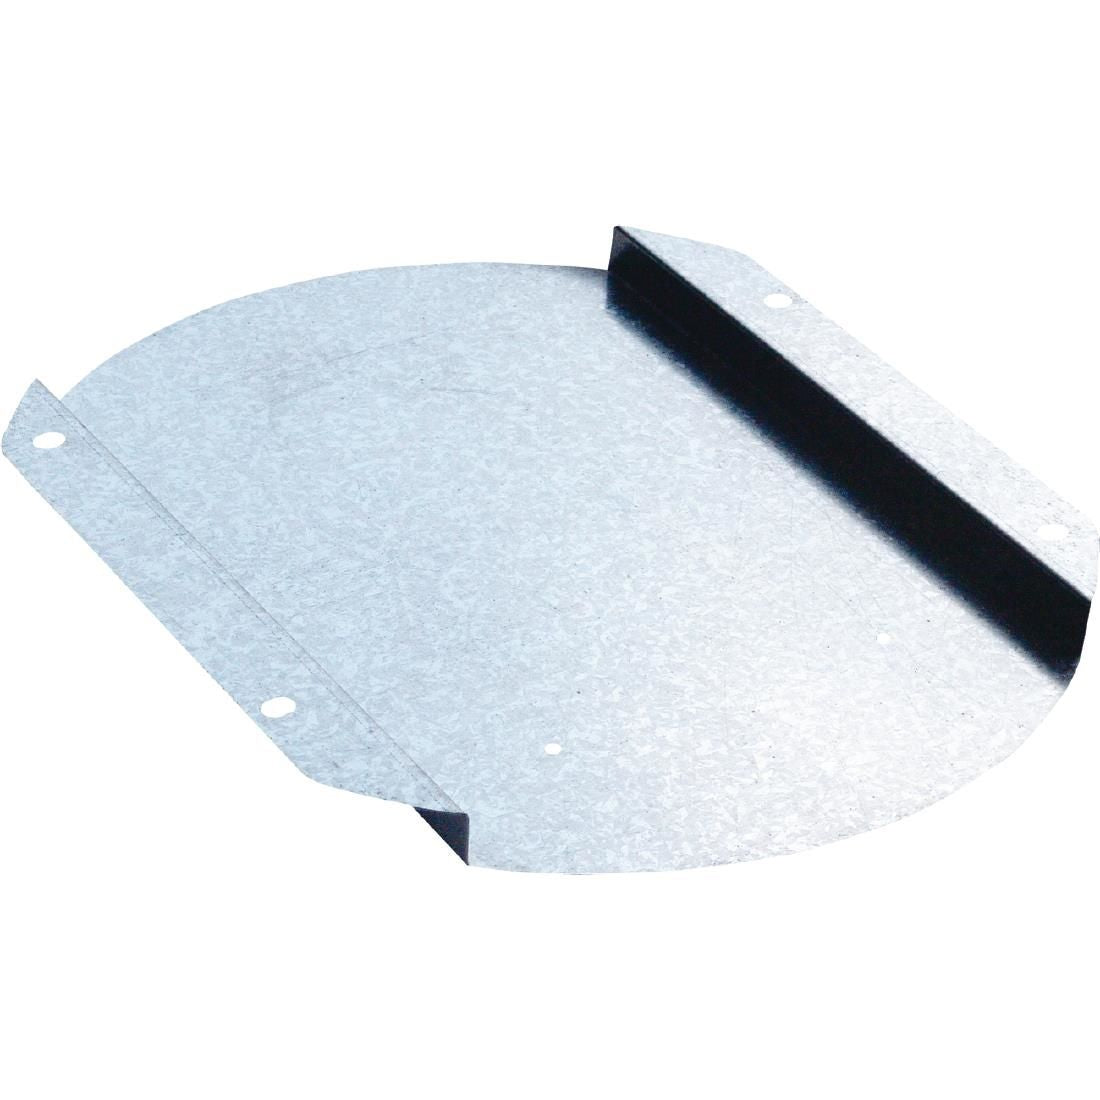 Buffalo Insulate Plate Cover JD Catering Equipment Solutions Ltd